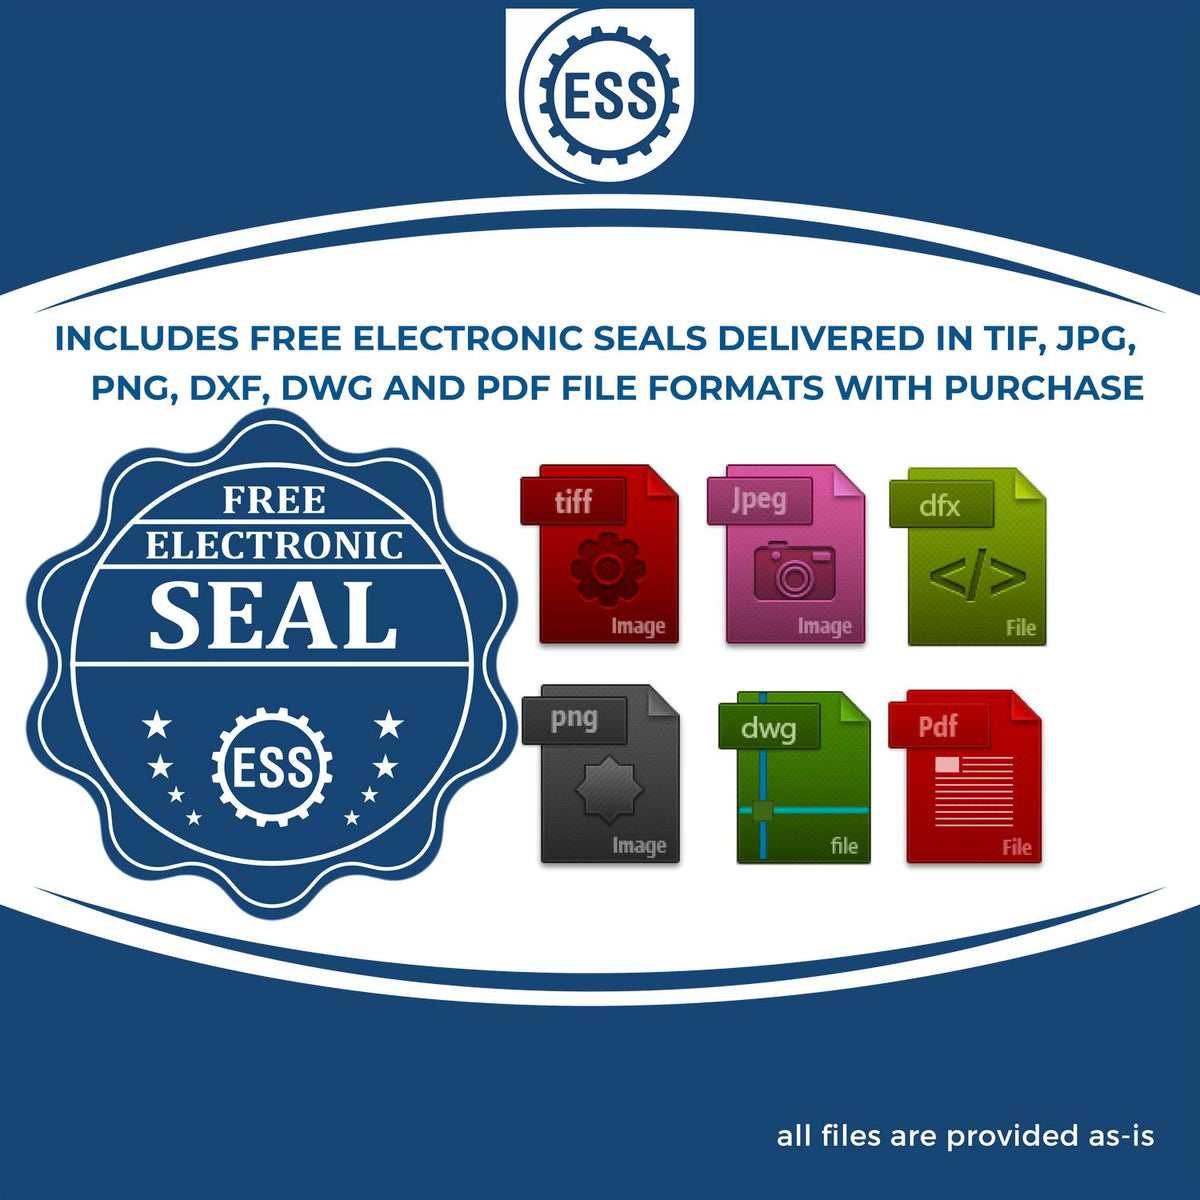 An infographic for the free electronic seal for the Heavy Duty Cast Iron Mississippi Engineer Seal Embosser illustrating the different file type icons such as DXF, DWG, TIF, JPG and PNG.